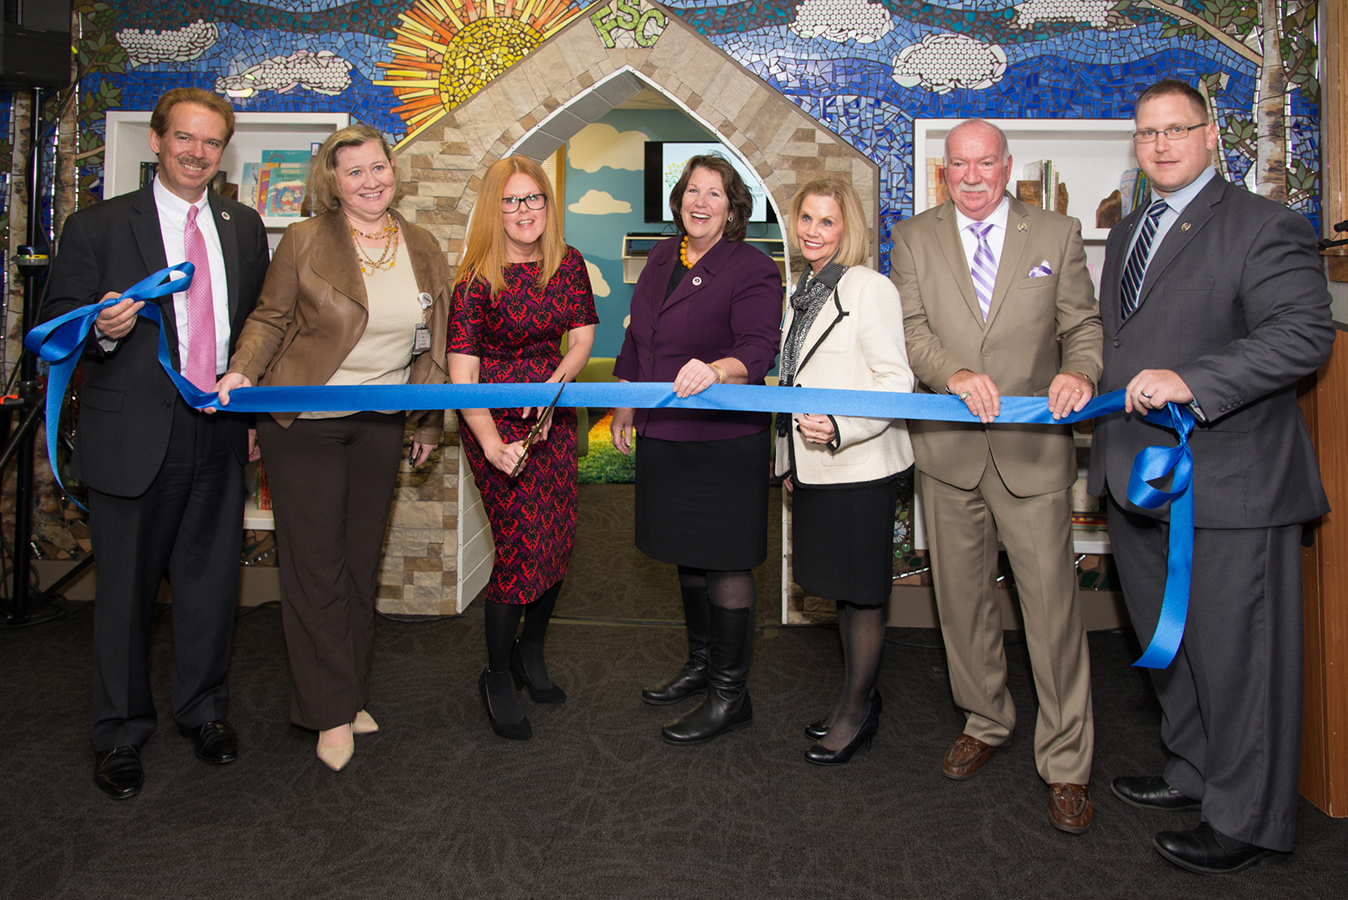 Ribbon cutting at Family Success Center of Commercial Township’s new Laurel Lake location